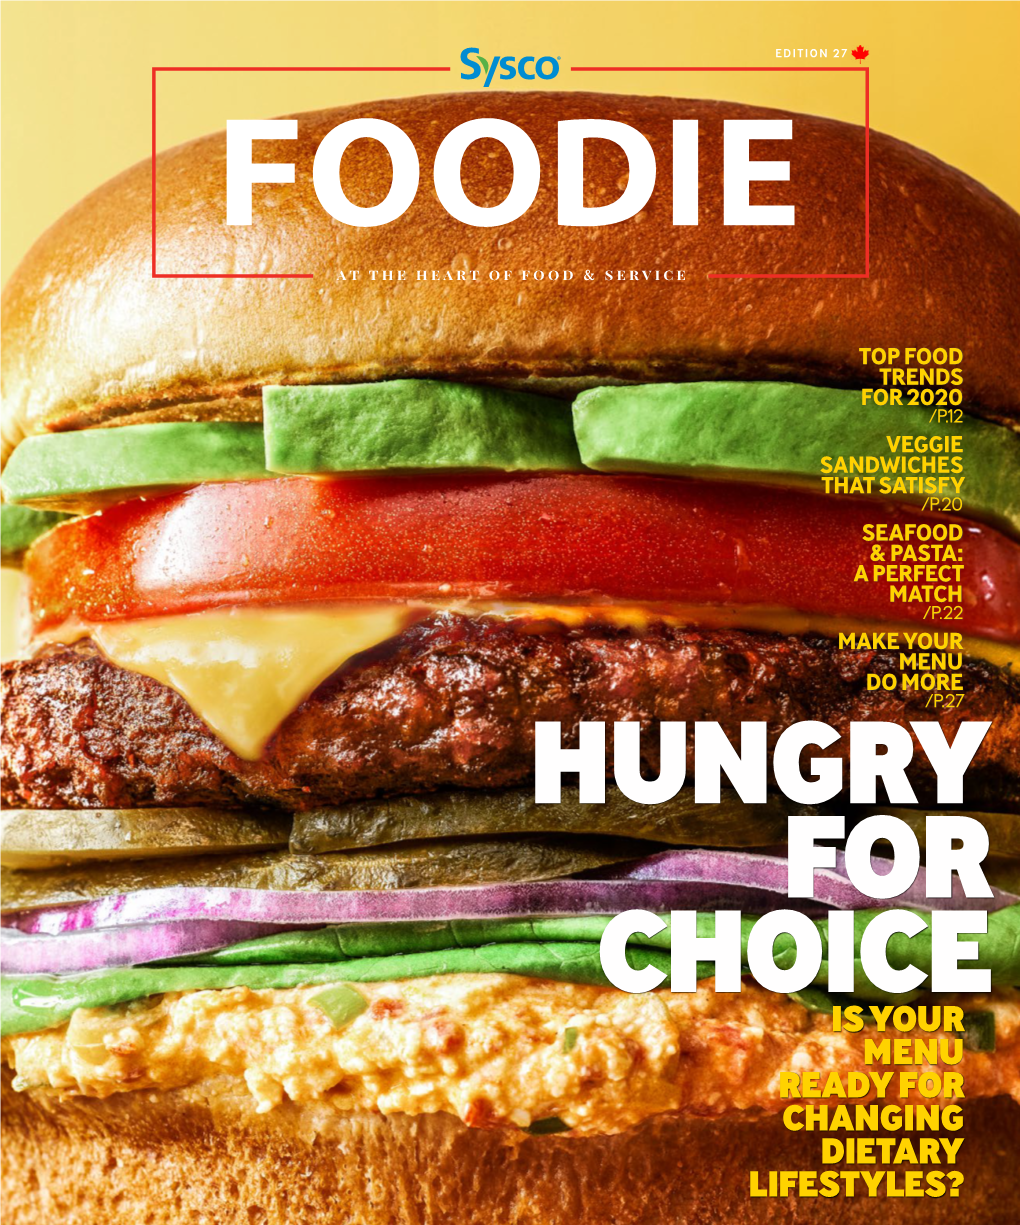 IS YOUR MENU READY for CHANGING DIETARY LIFESTYLES? EDITION 27 TABLE of CONTENTS